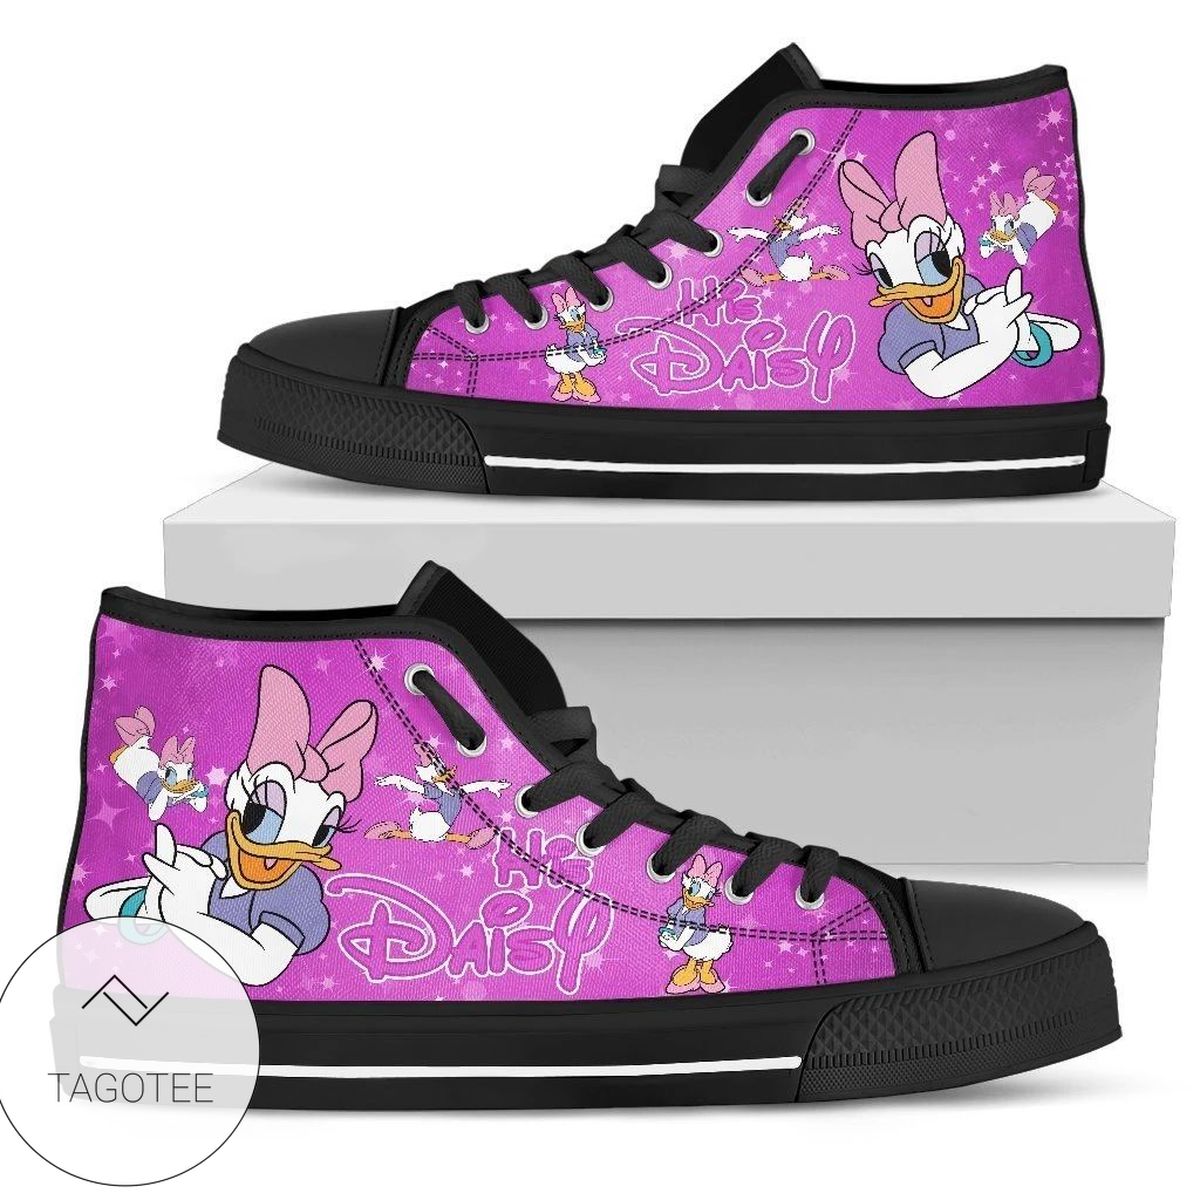 Her Donald His Daisy Sneakers High Top Shoes For Couple High Top Shoes